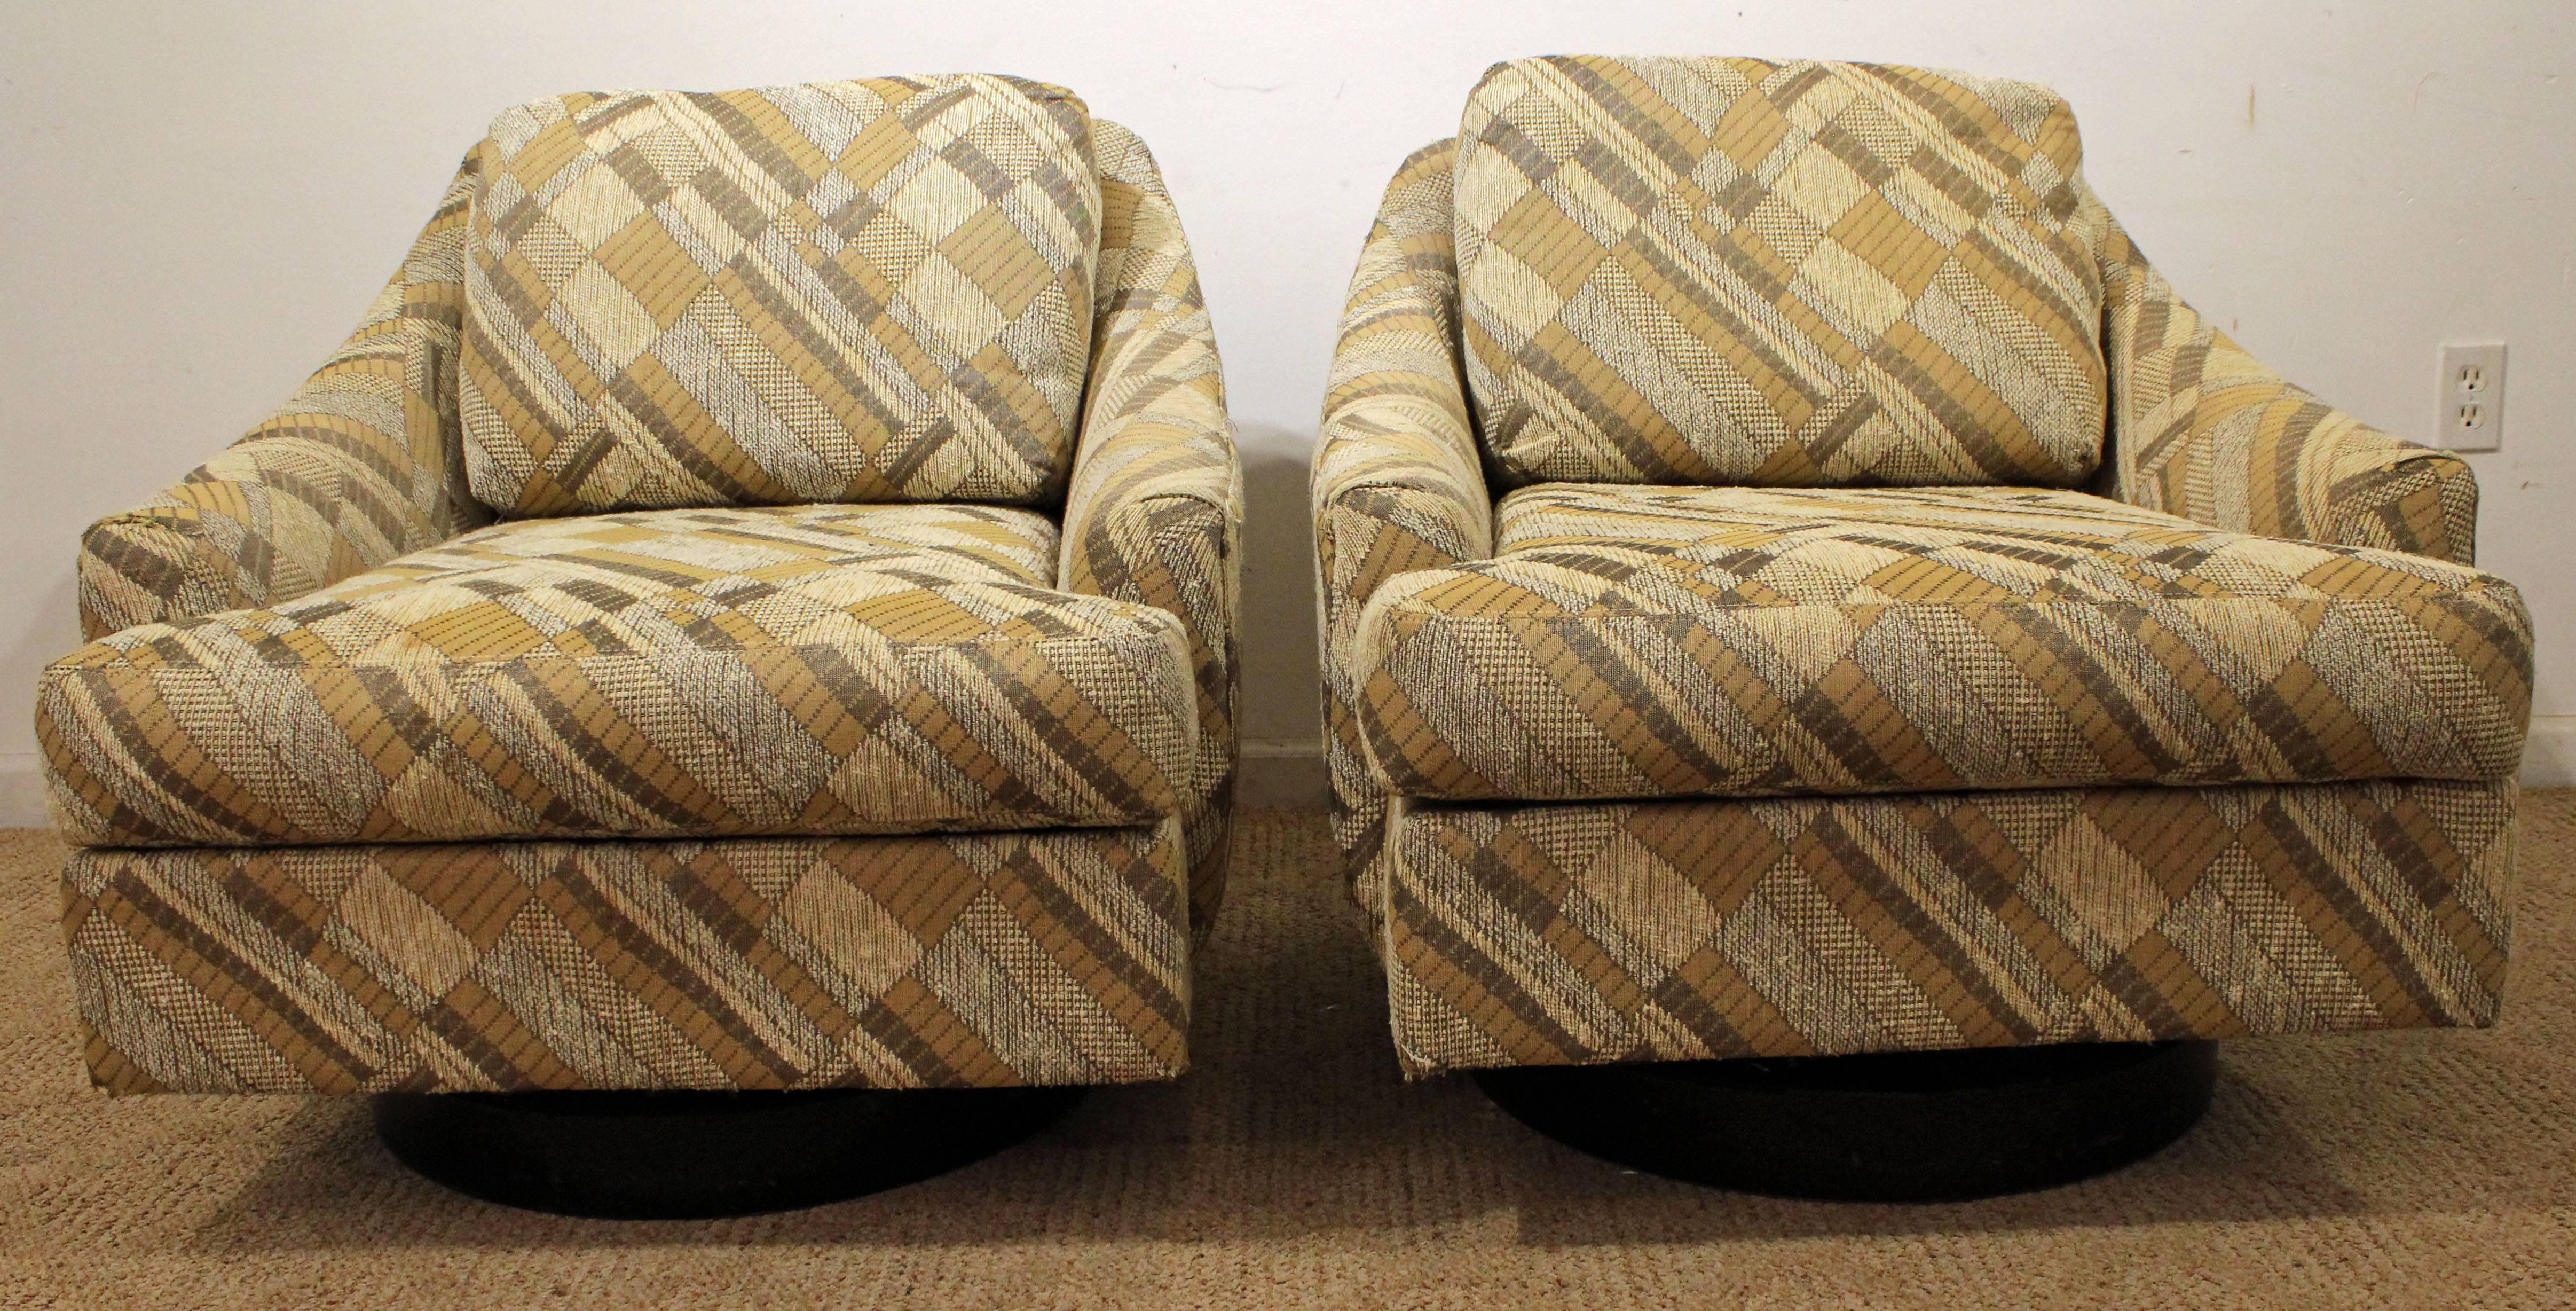 These chairs swivel and feature a walnut base with geometric pattern upholstery.